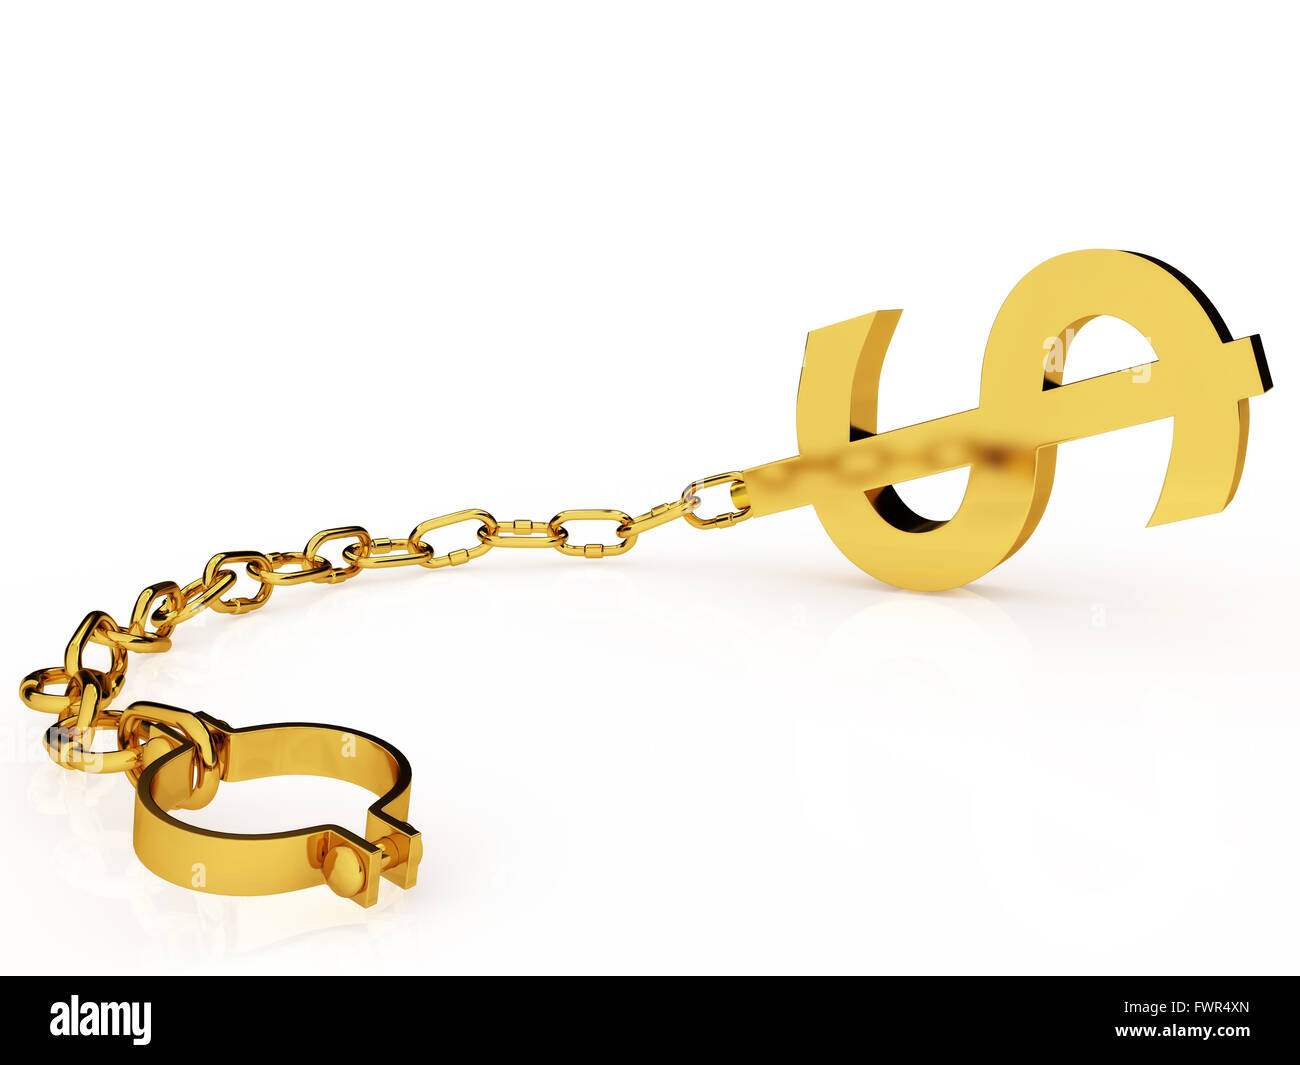 Ball and chain dollar symbol isolated on a white background. Stock Photo